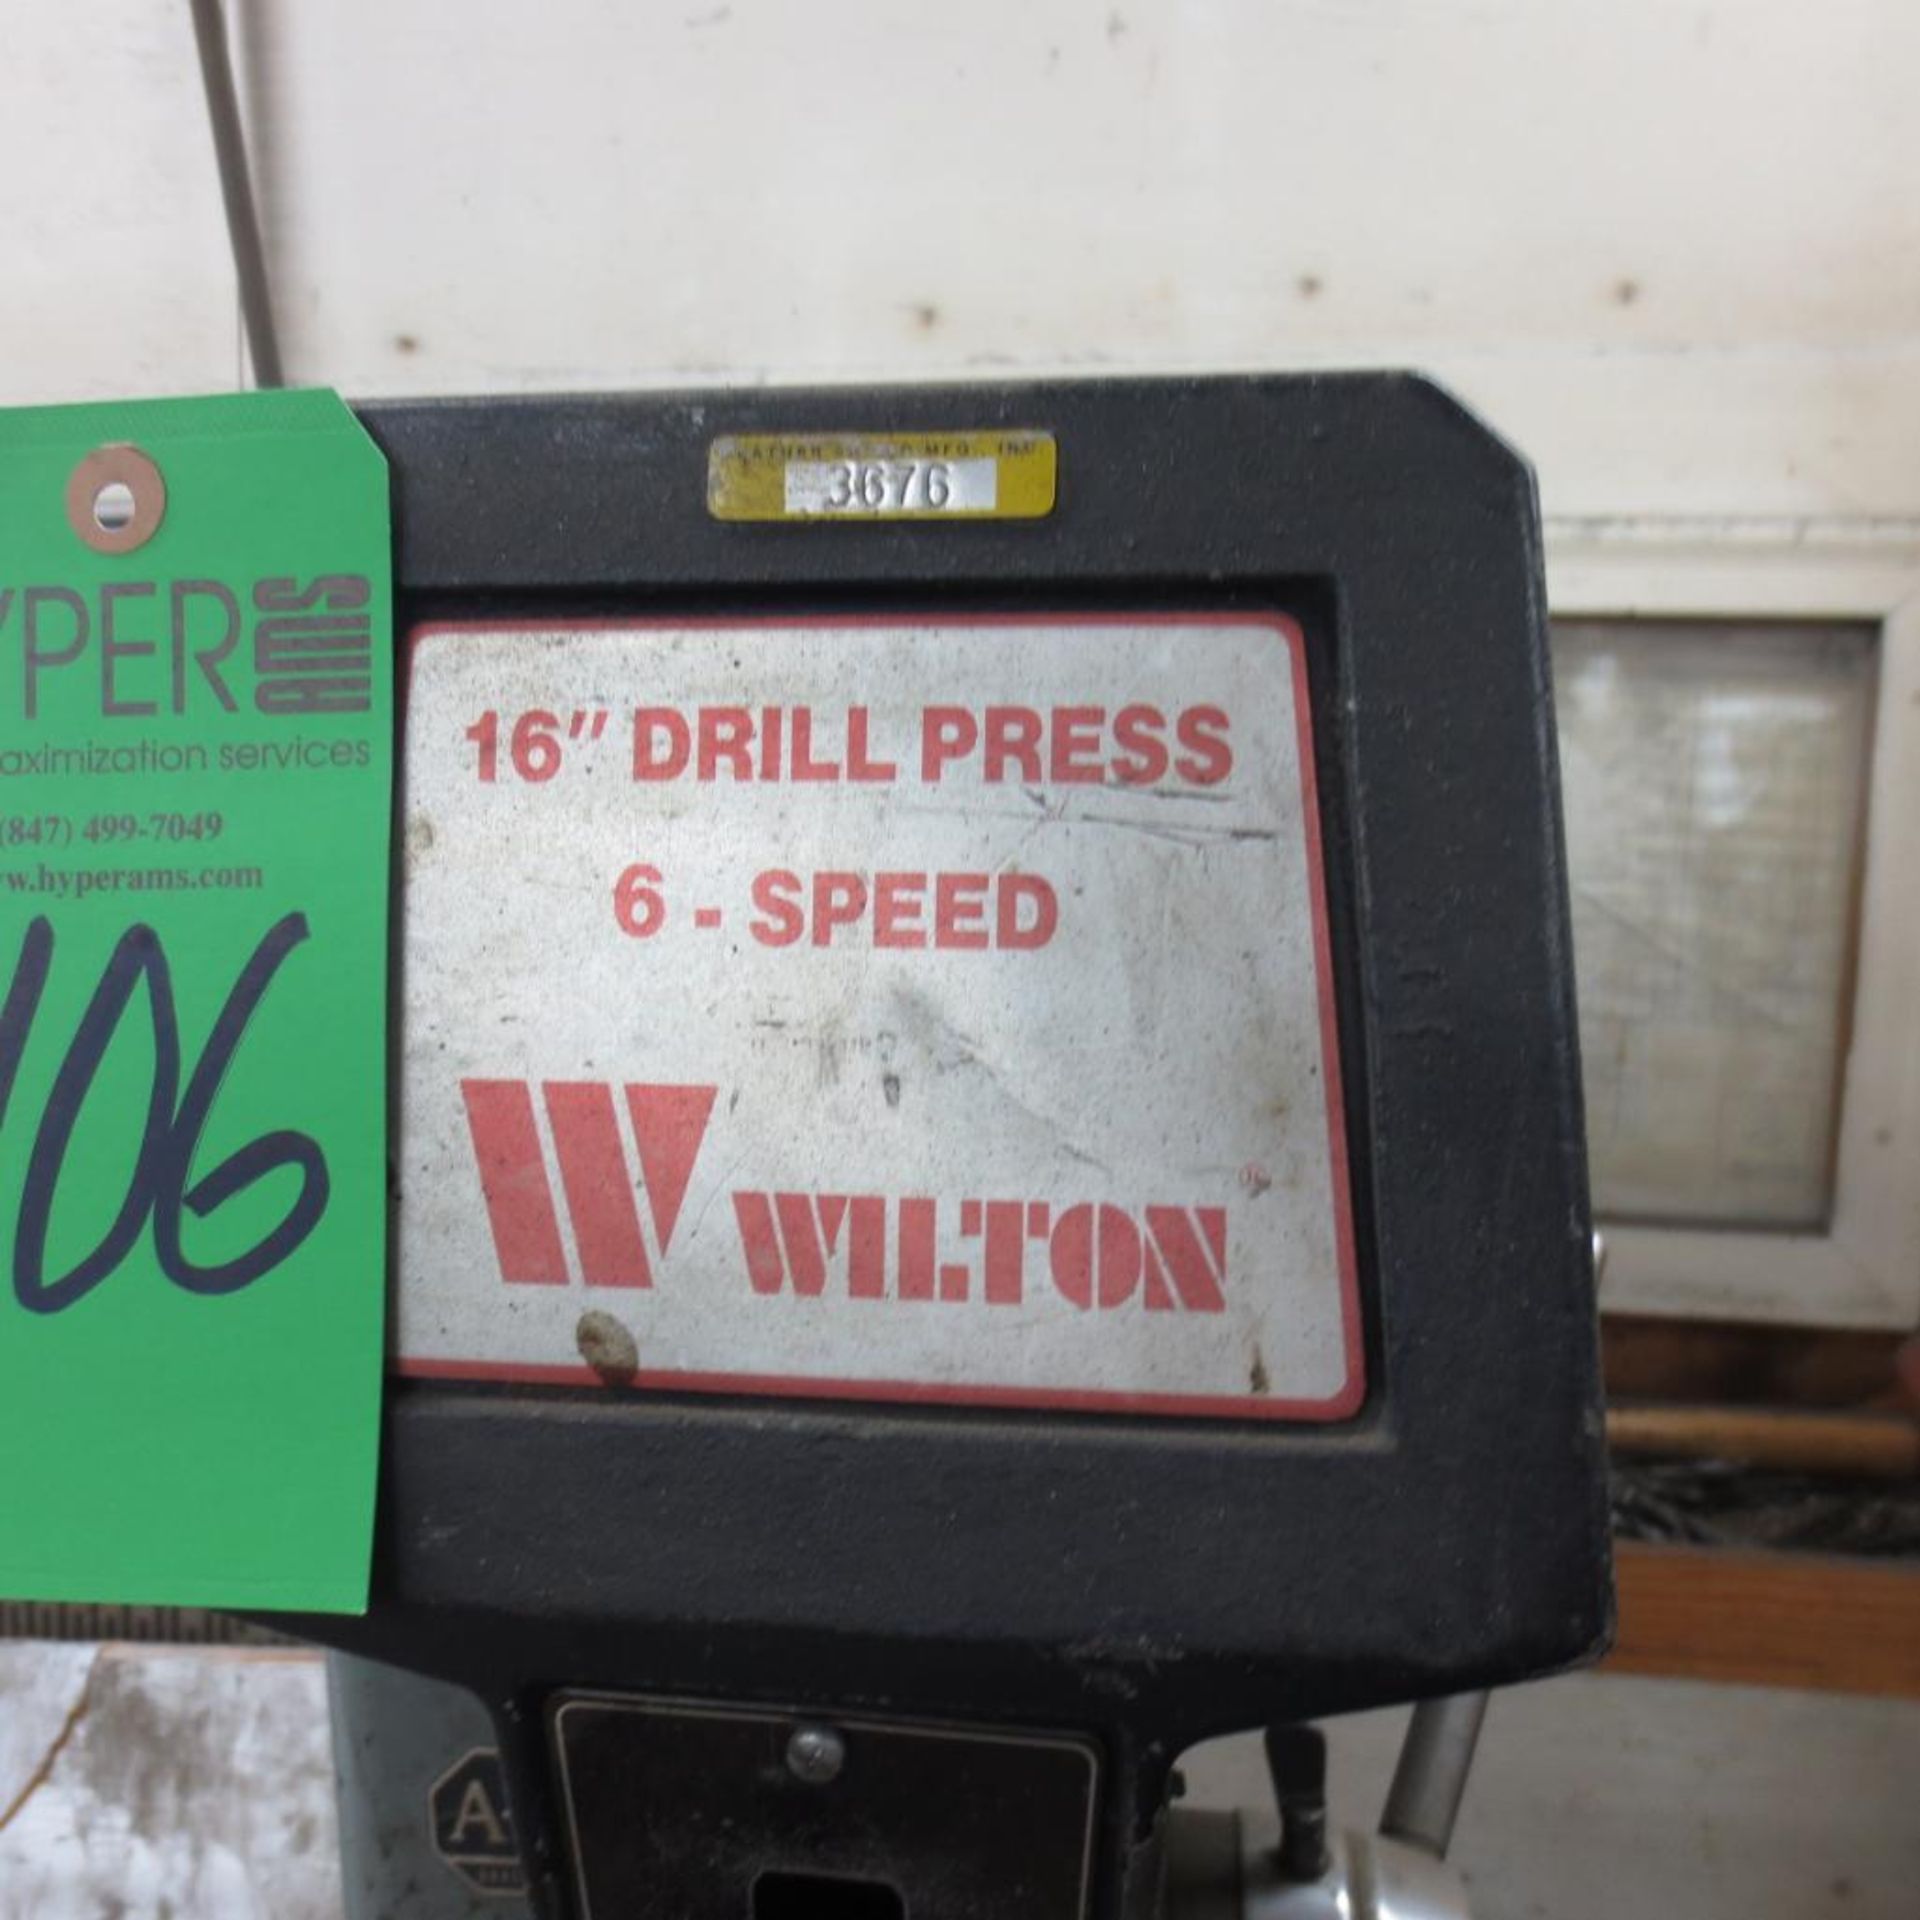 Wilton 16" Model 2800 Floor-Type Vertical Drill Press, 6 Speed, 12" X 12" Table, ( WS 3676 ) - Image 3 of 3